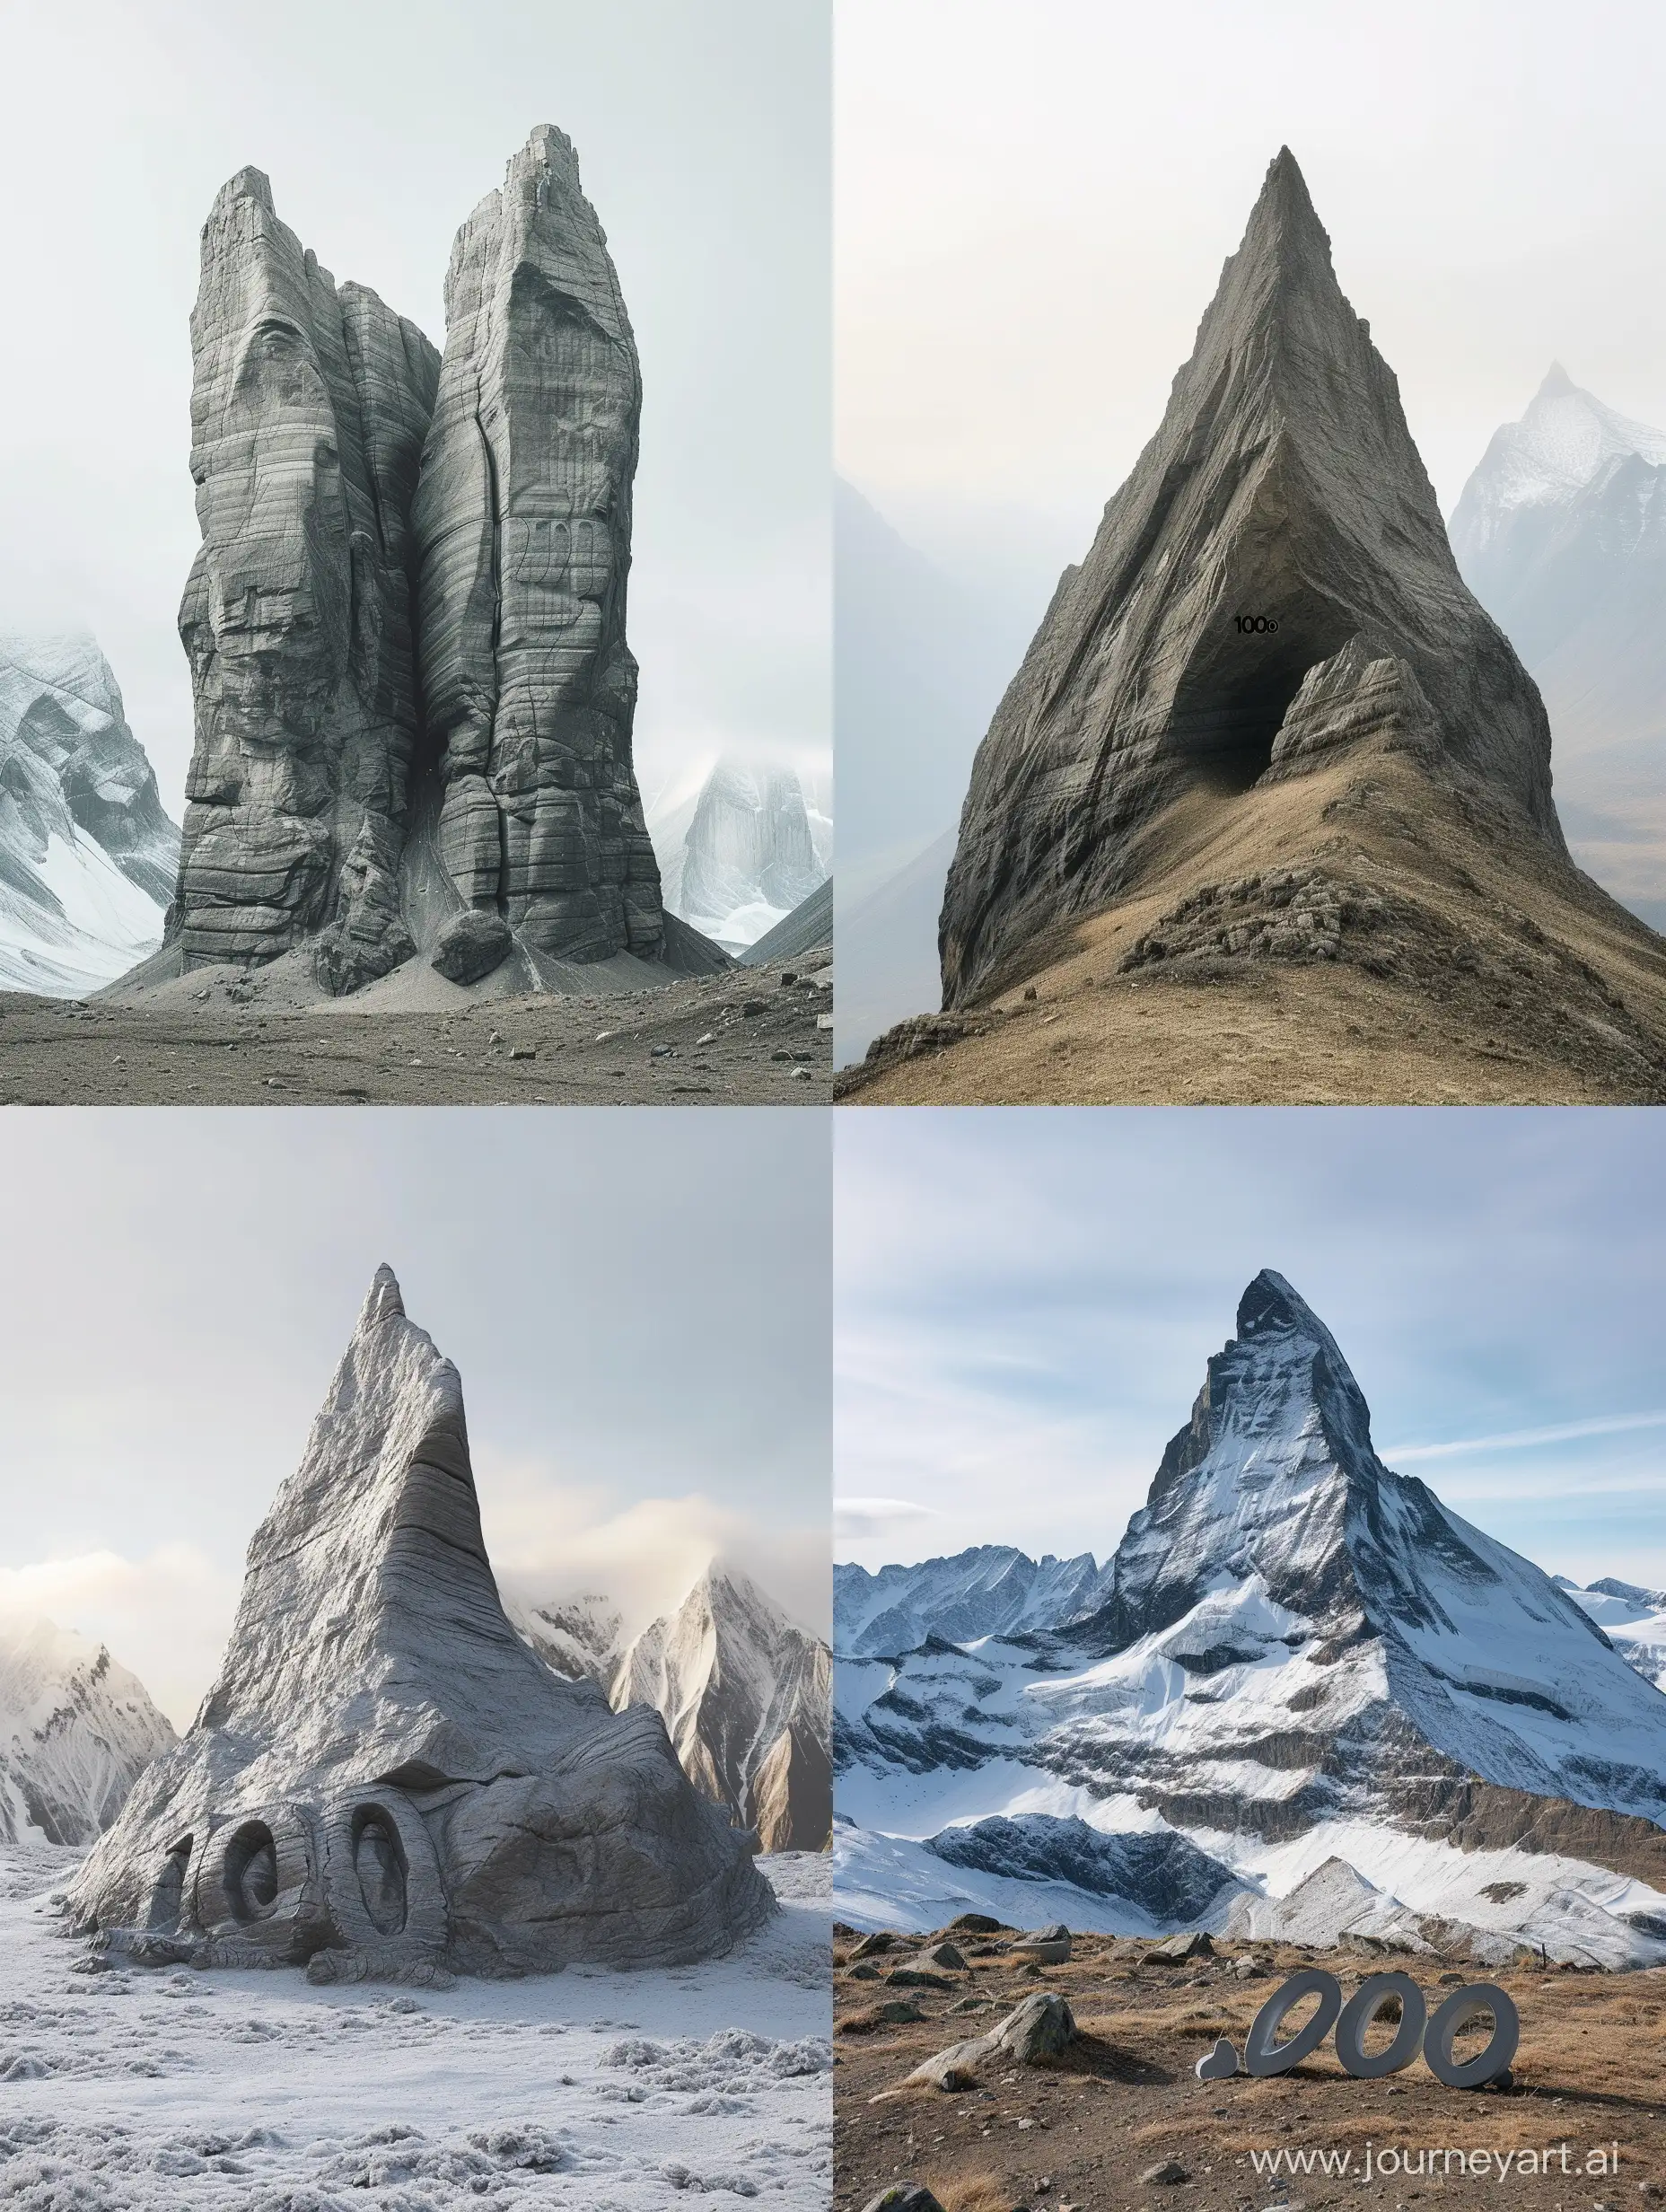 The shape of the mountain is "1000"